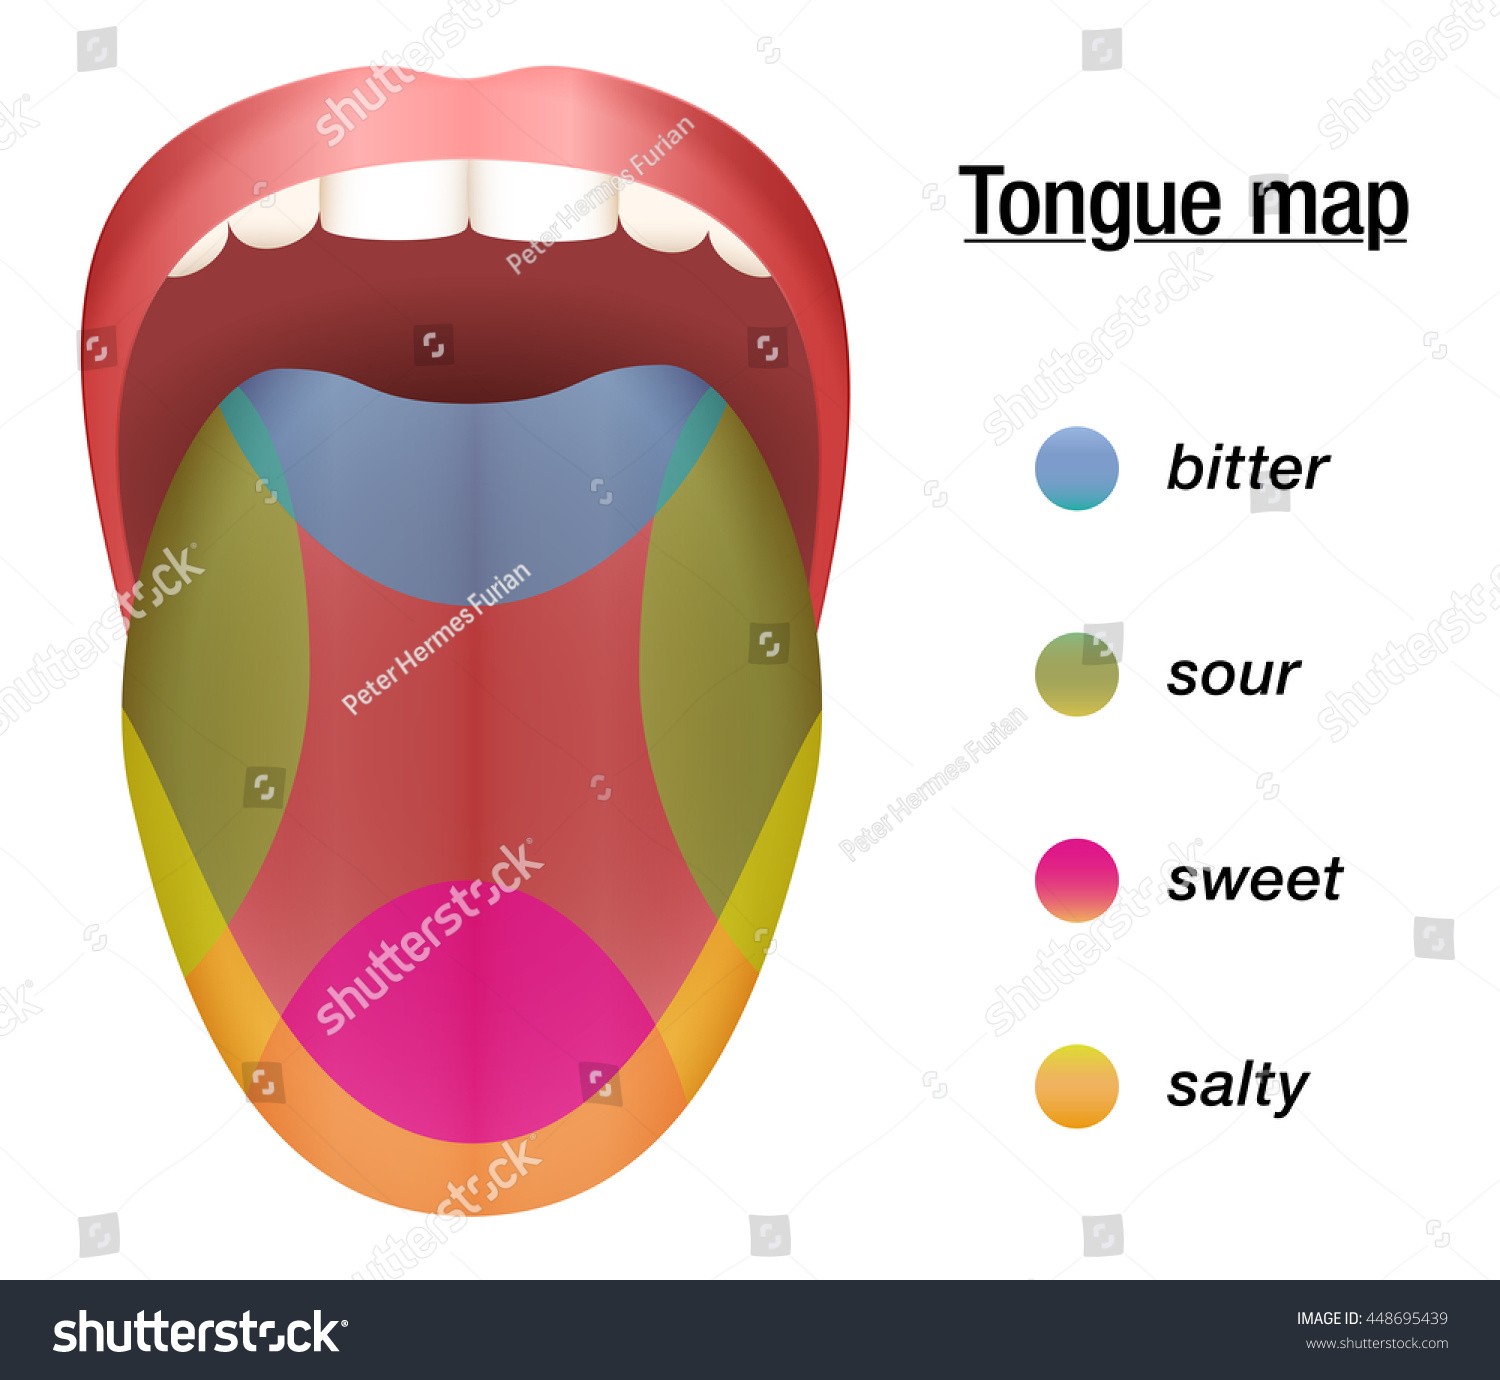 Stock Vector Taste Map Of The Tongue With Its Four Taste Areas Bitter Sour Sweet And Salty 448695439 